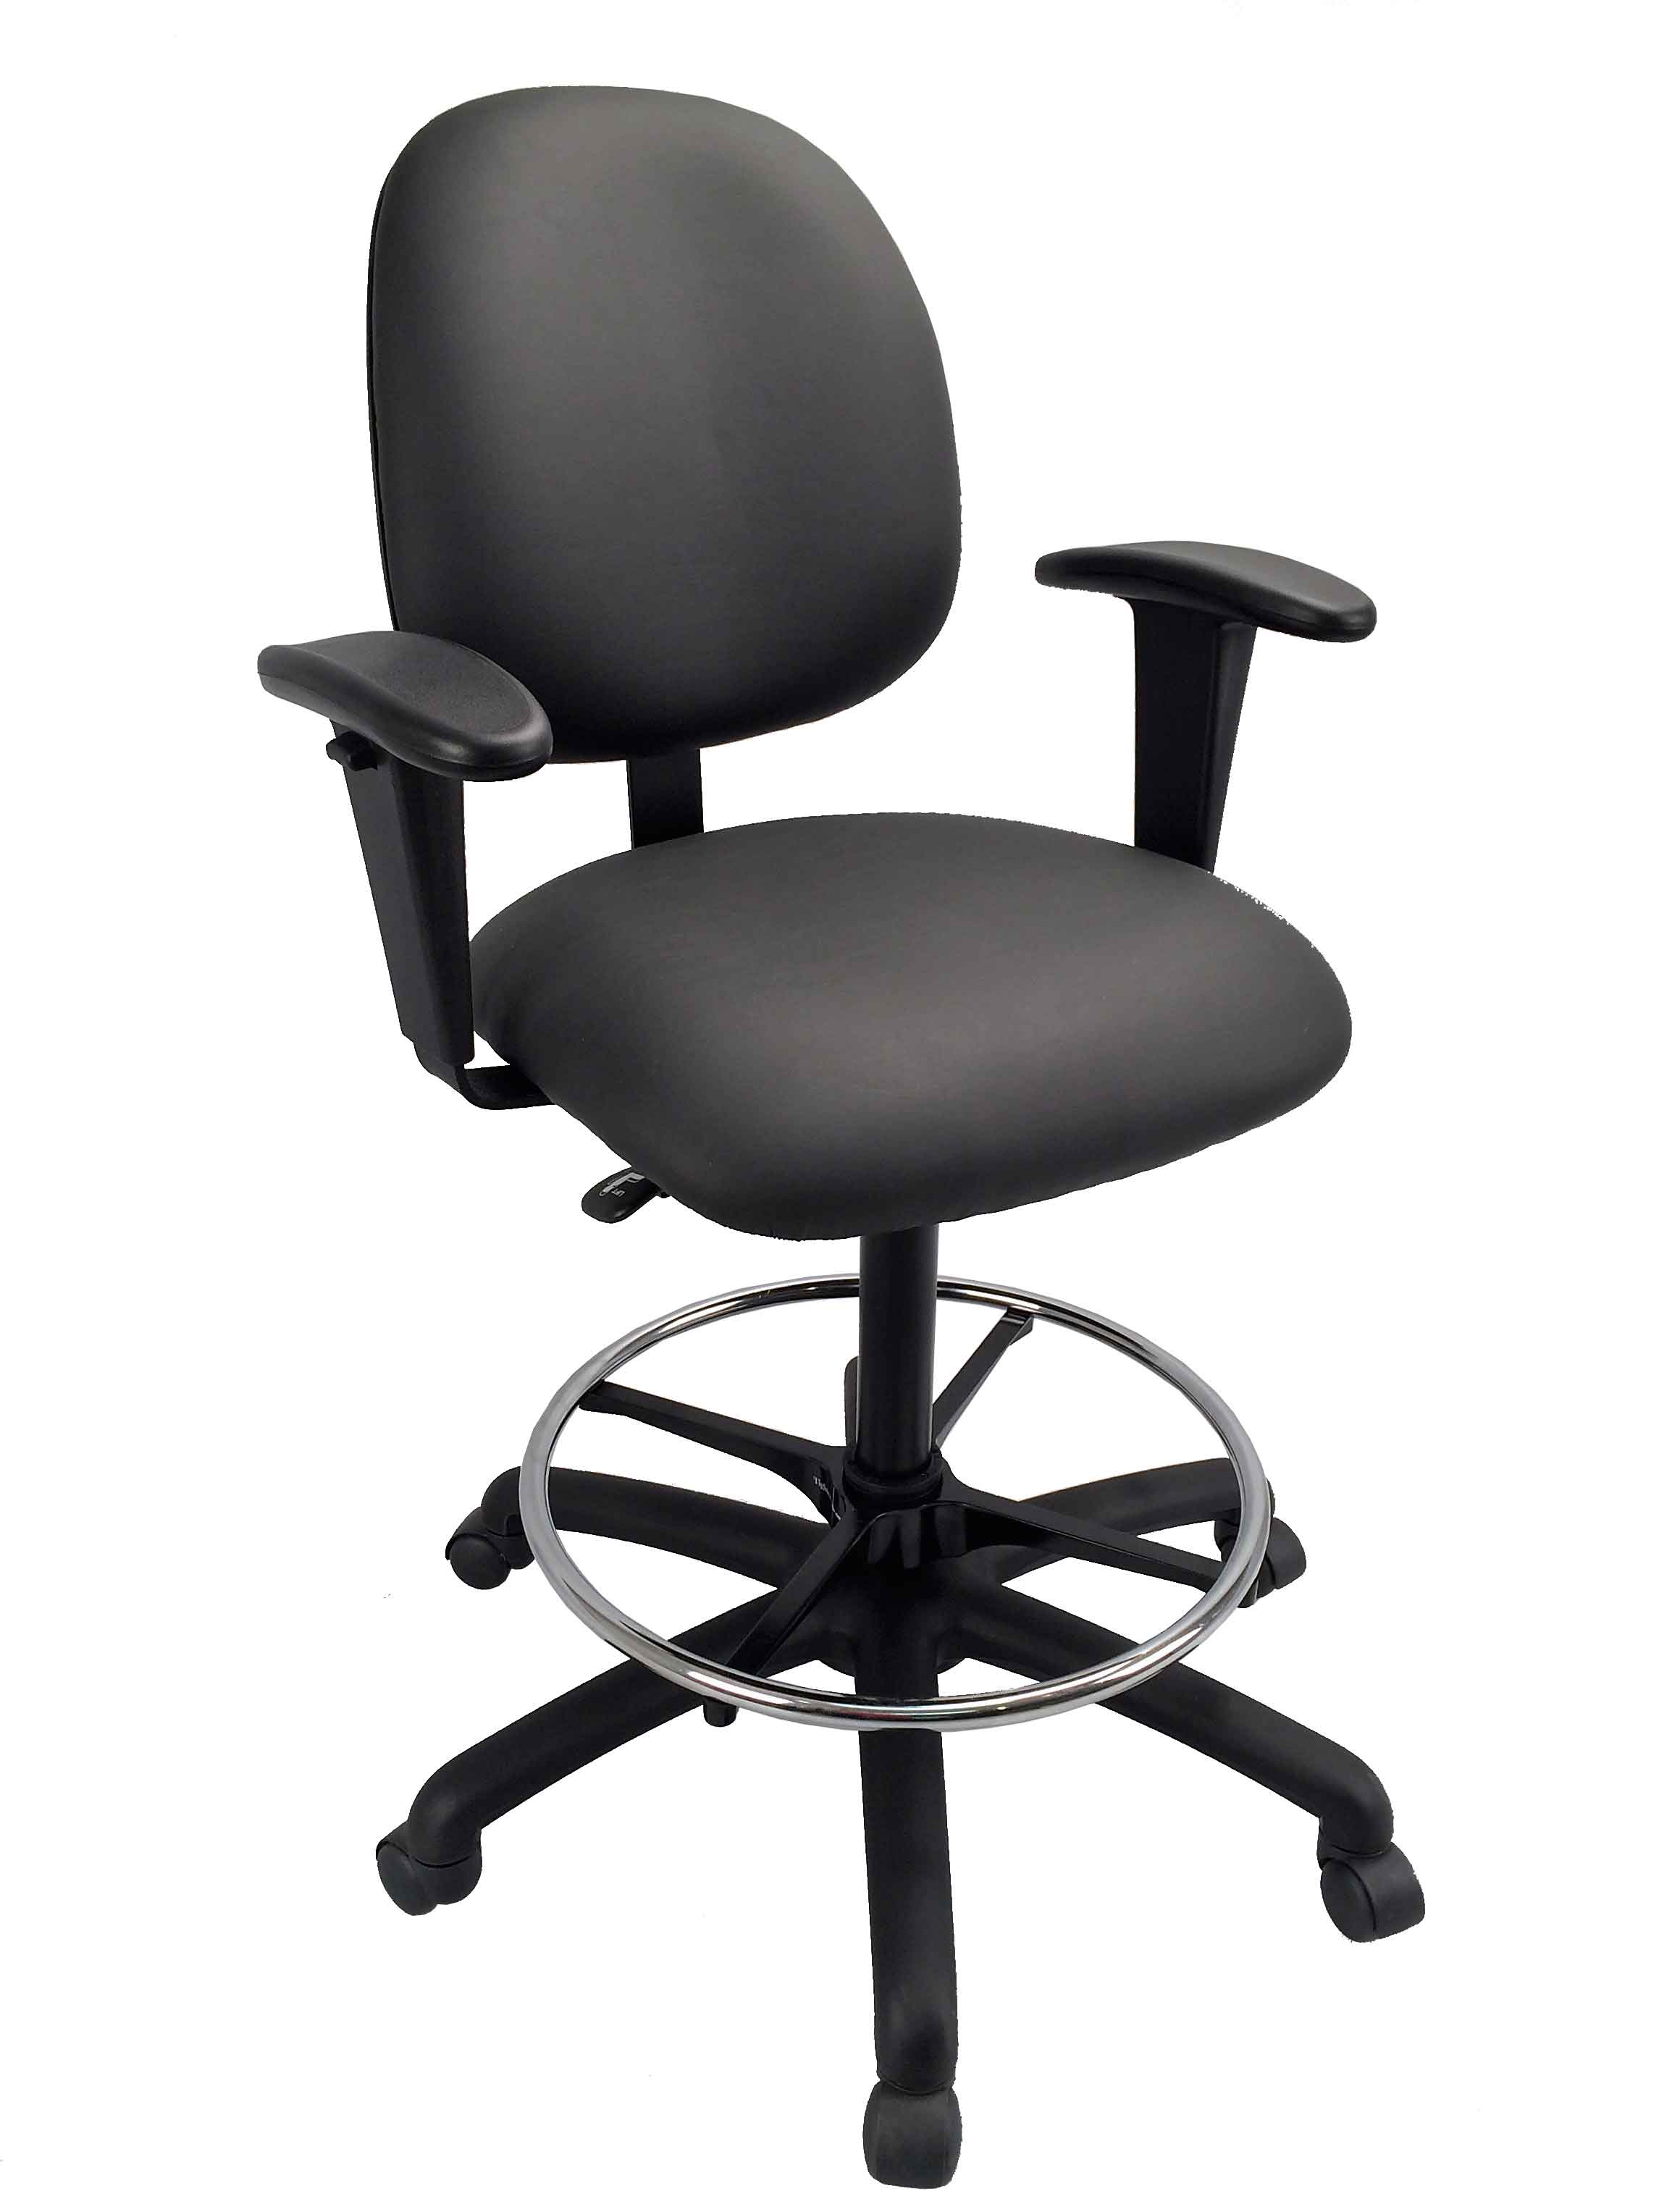 The Pilot Office Chair